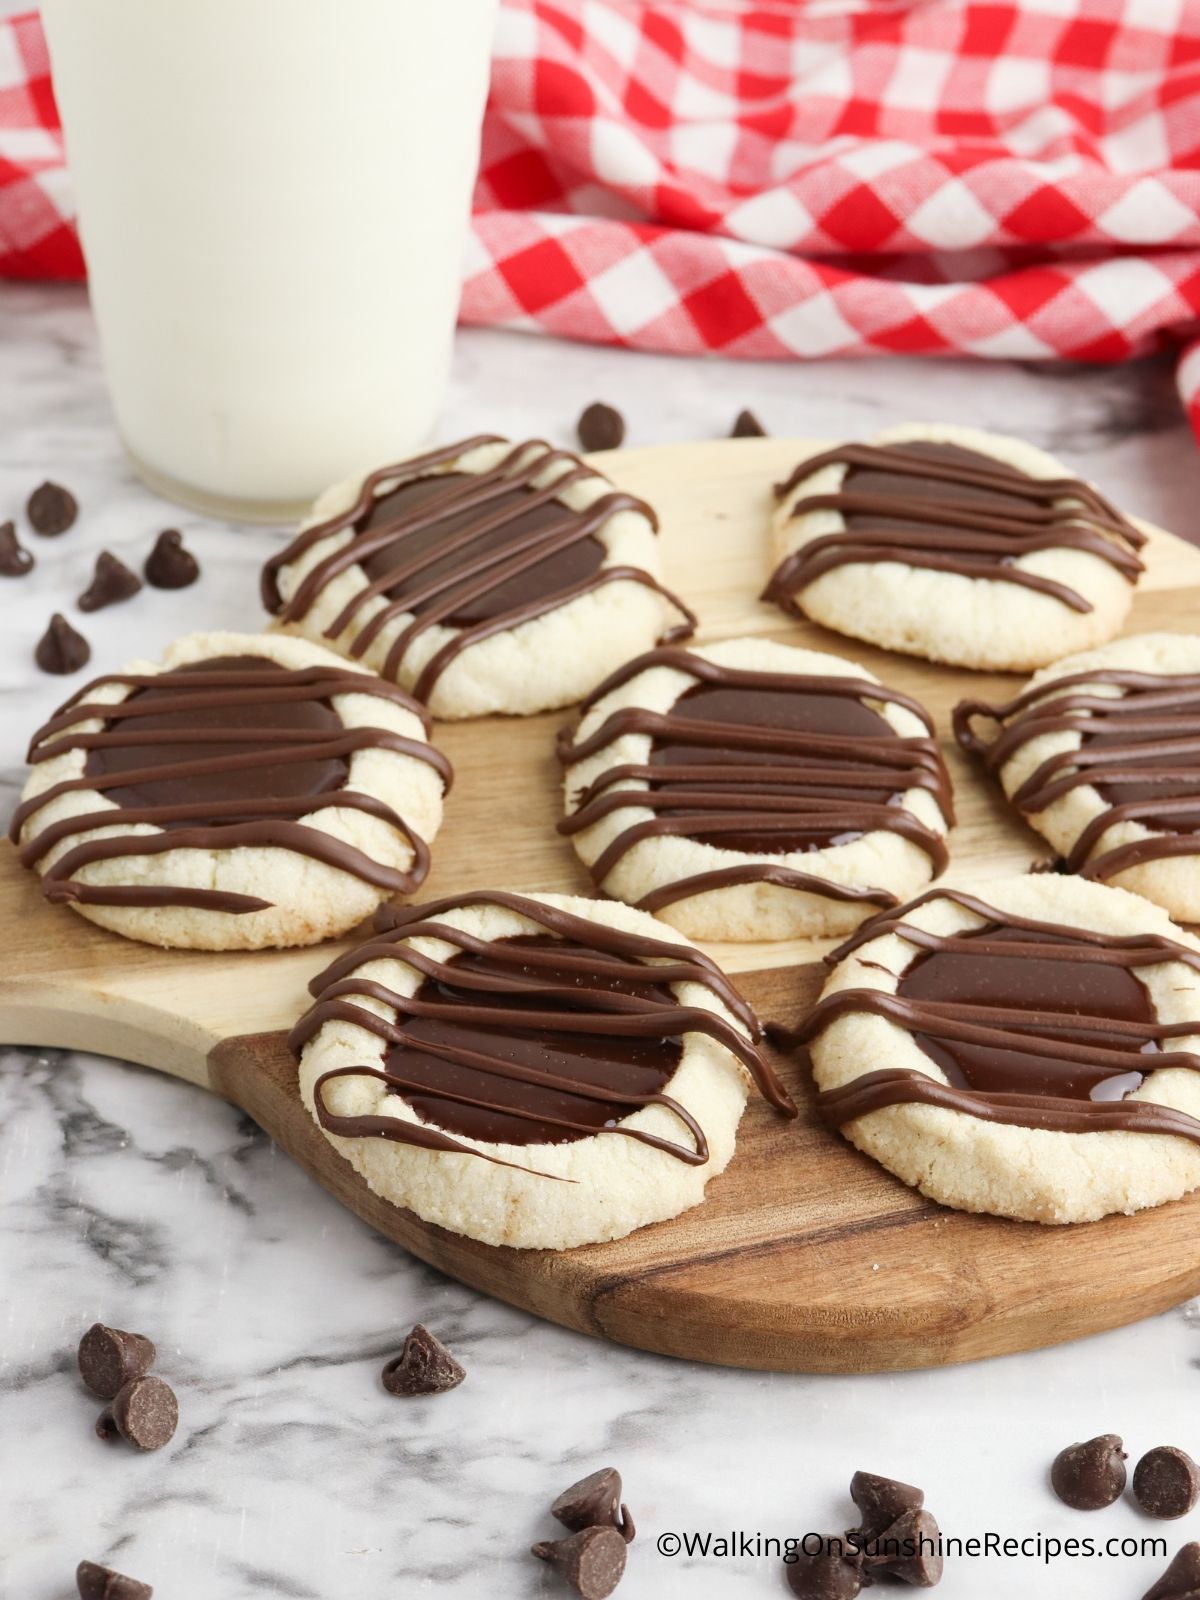 Shortbread Thumbprint Cookies with Chocolate Ganache Drizzle.